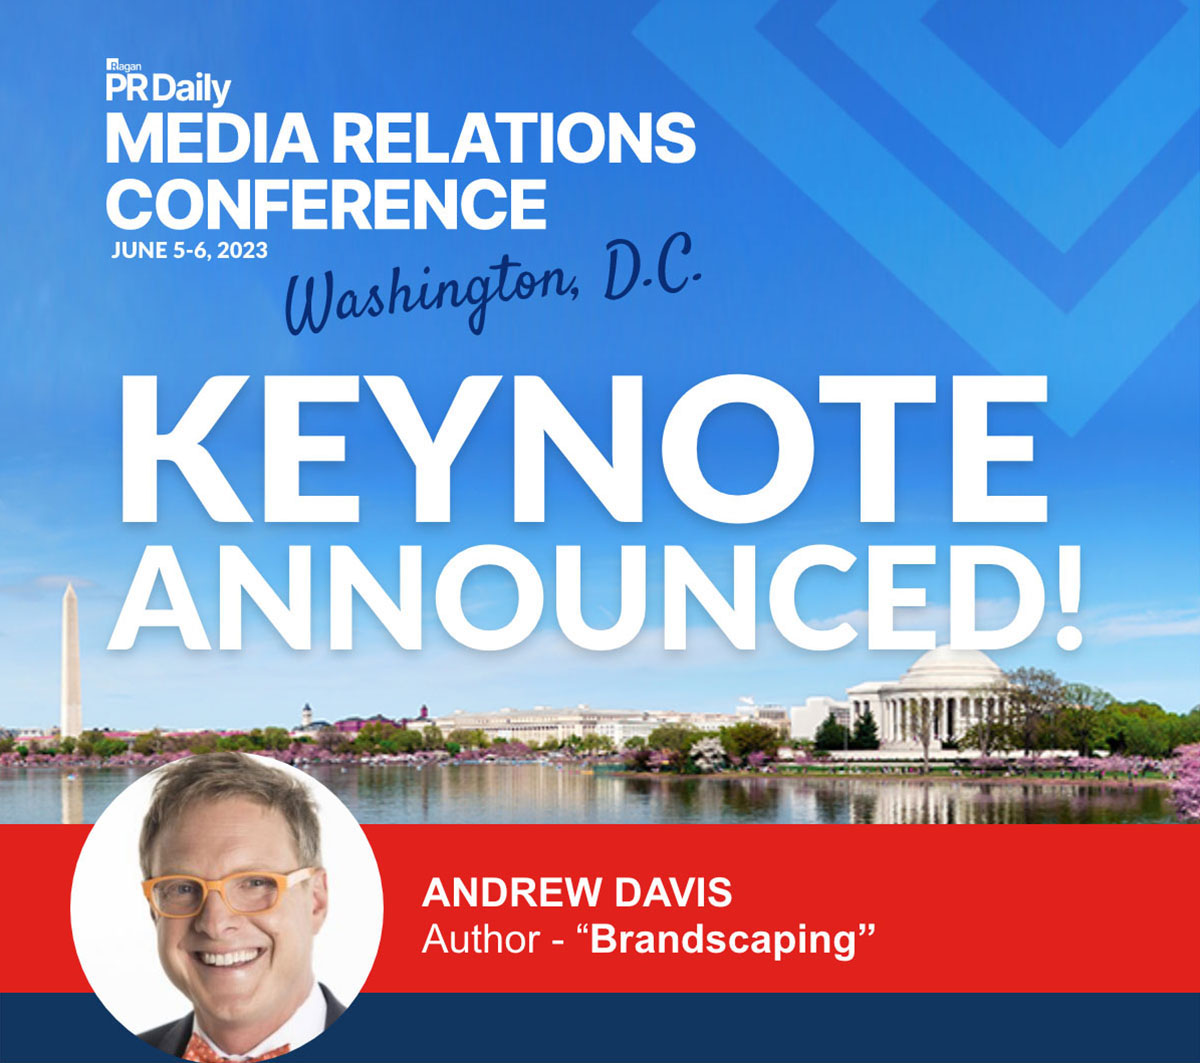 PR Daily's Media Relations Conference | June 5-6, 2023 | Washington, D.C. | Keynote Announced! | Andrew Davis, Author - Brandscaping